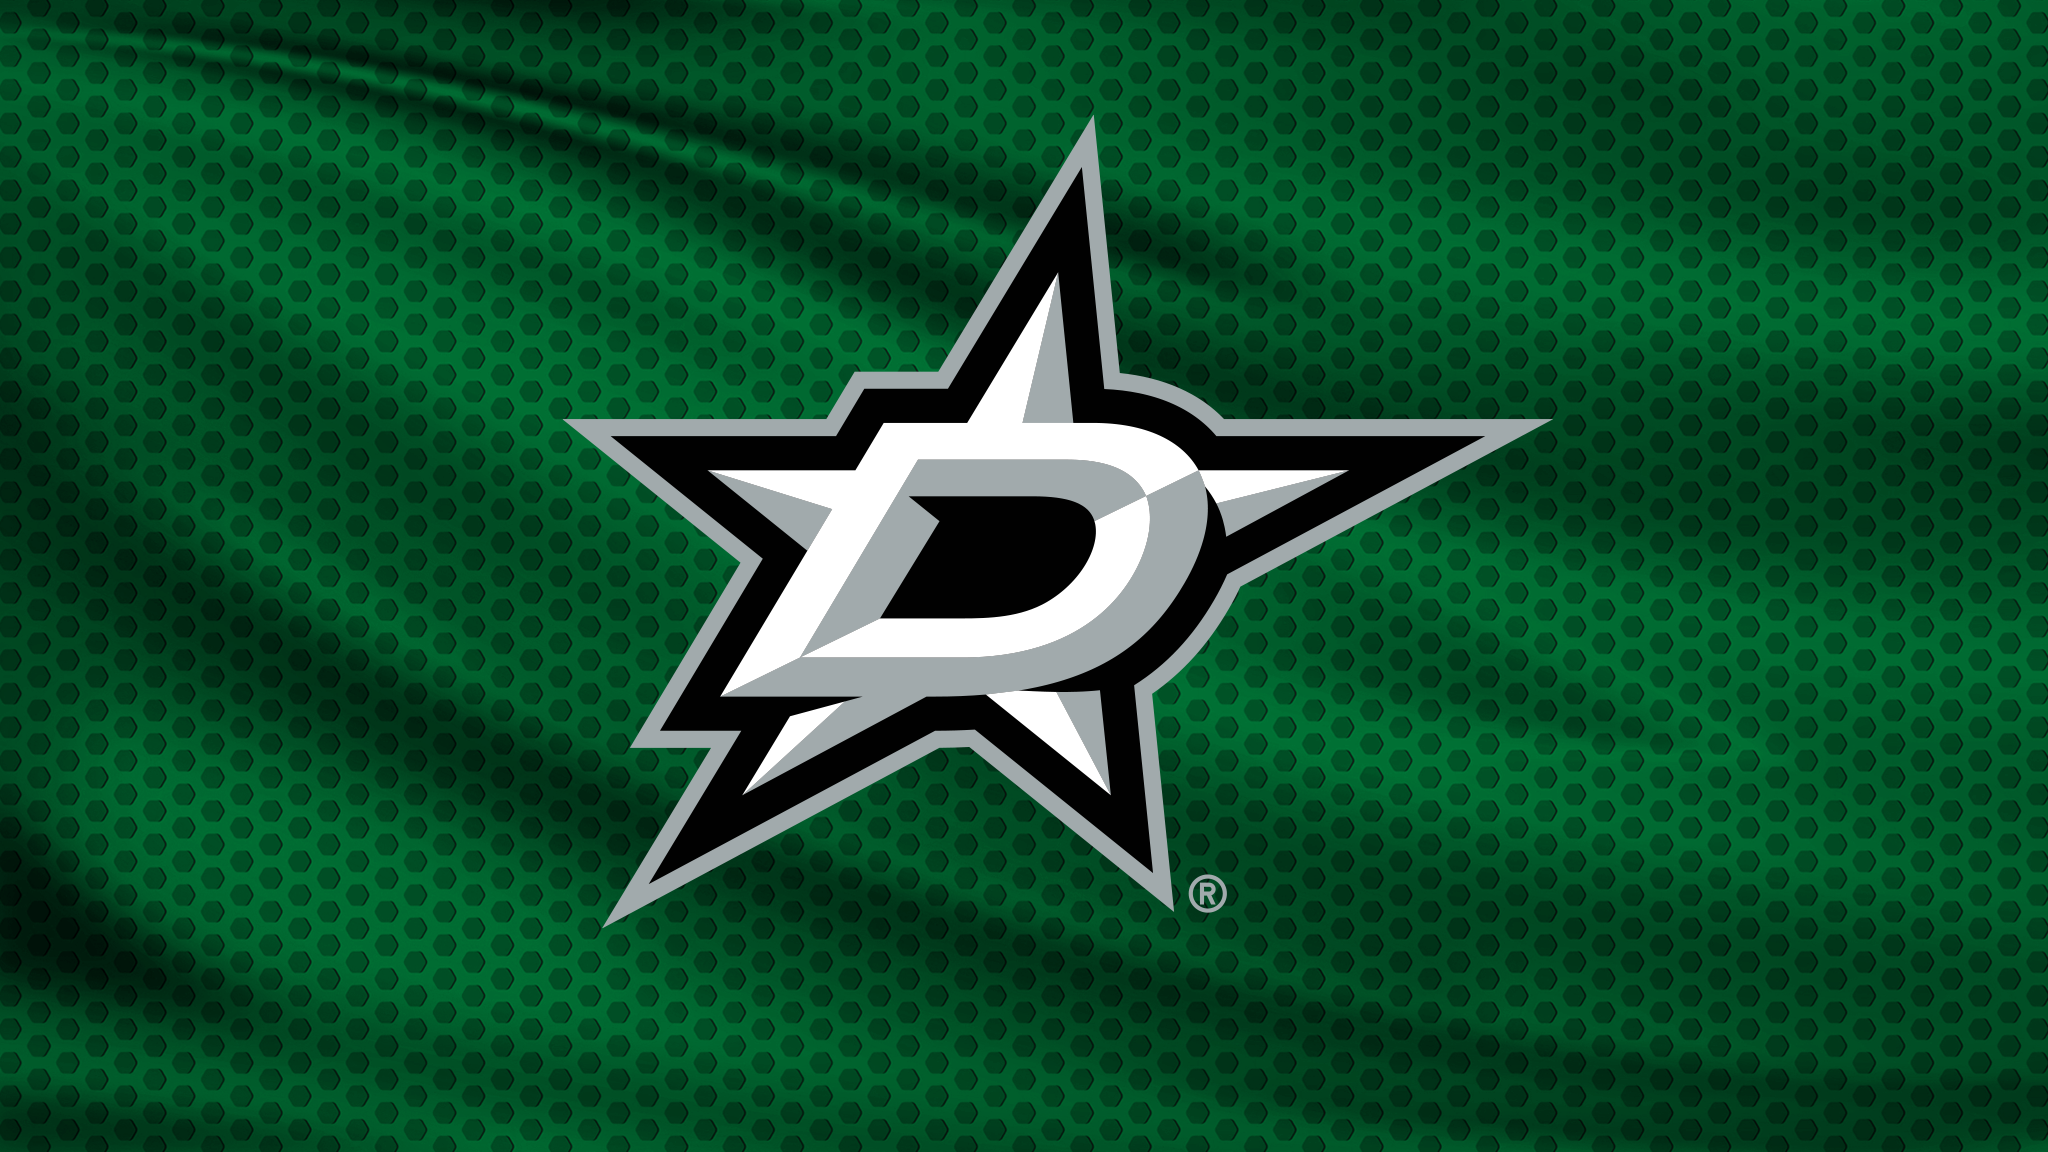 Stanley Cup Final: TBD at Stars Rd4 Hm Gm 1